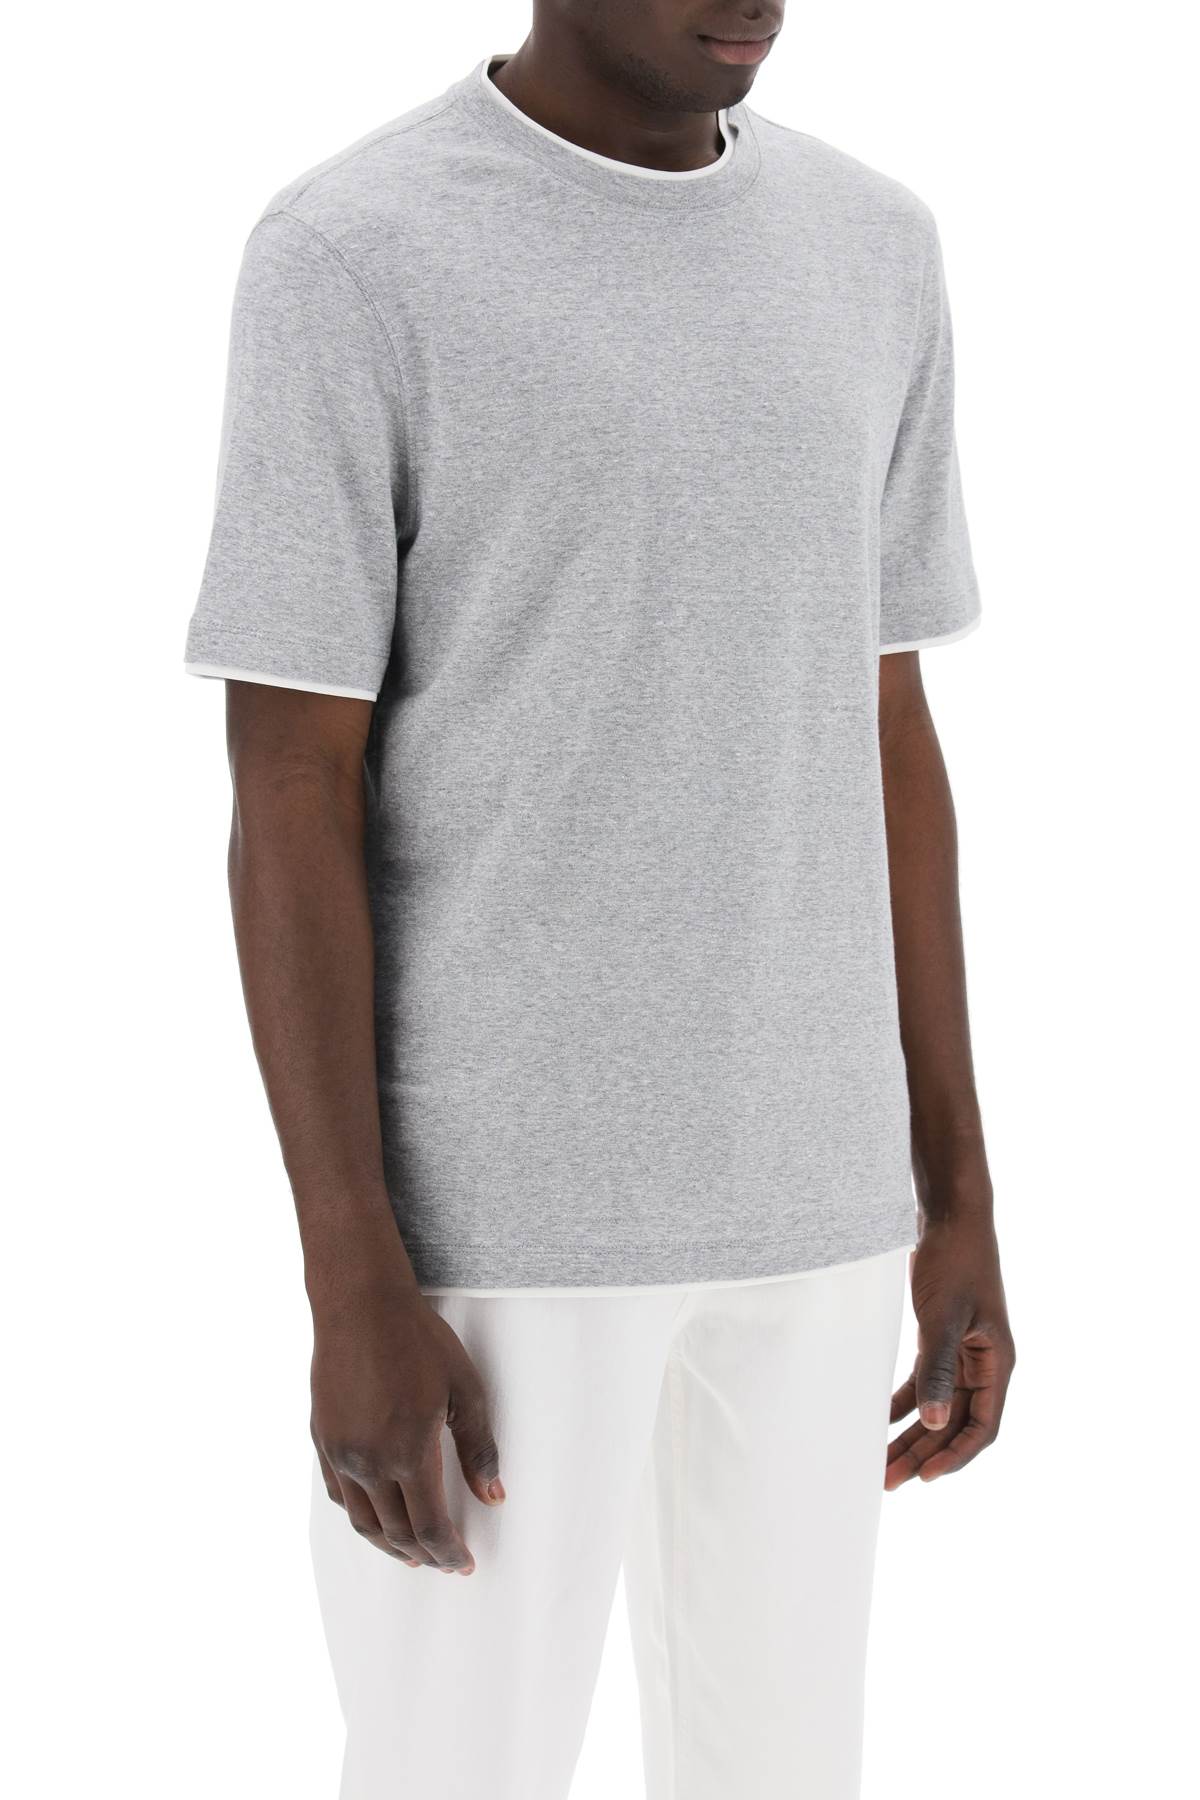 Brunello cucinelli overlapped-effect t-shirt in linen and cotton-men > clothing > t-shirts and sweatshirts > t-shirts-Brunello Cucinelli-Urbanheer